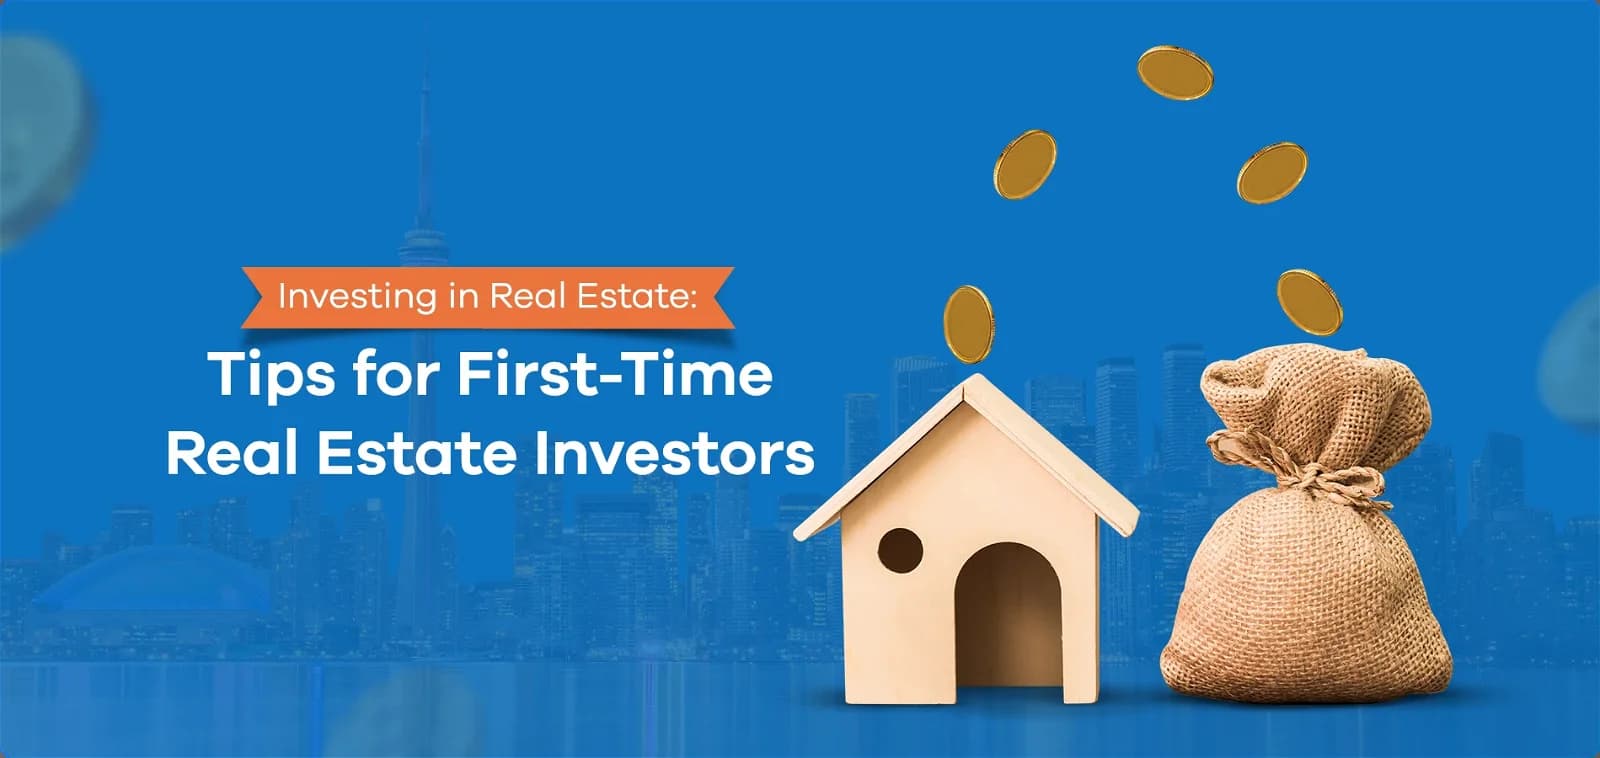 Investing in Real Estate: Tips for First-Time Real Estate Investors